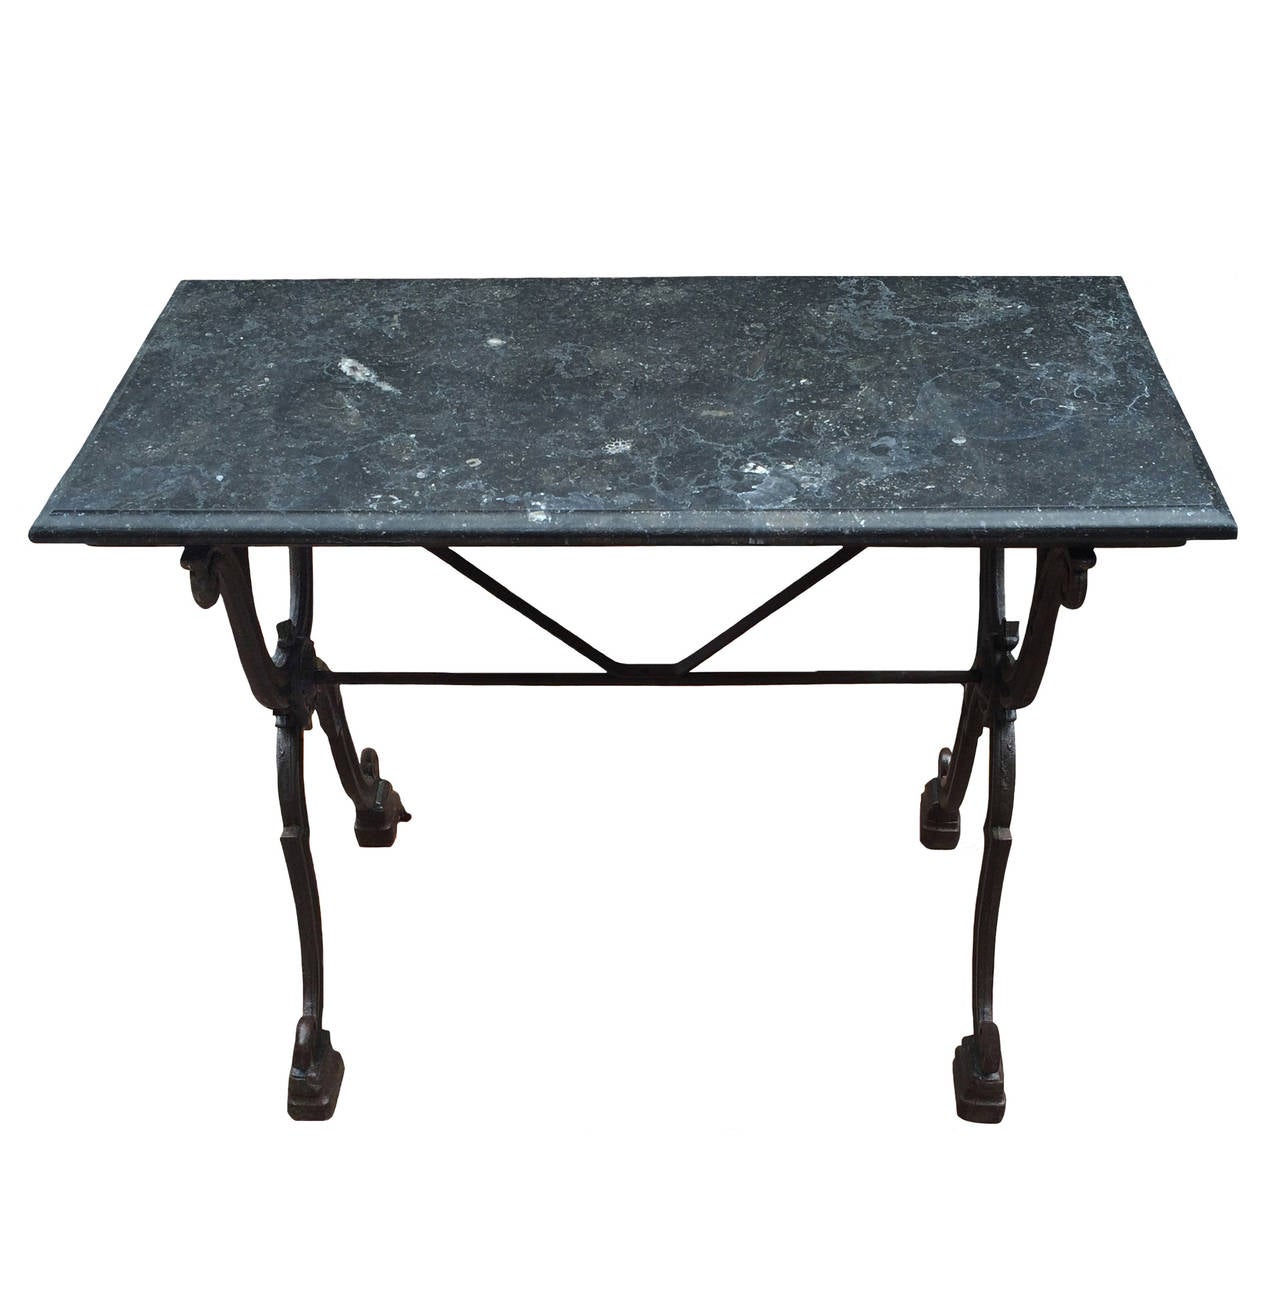 French butcher table with petit granite stone top; intricate iron base, 19th century.